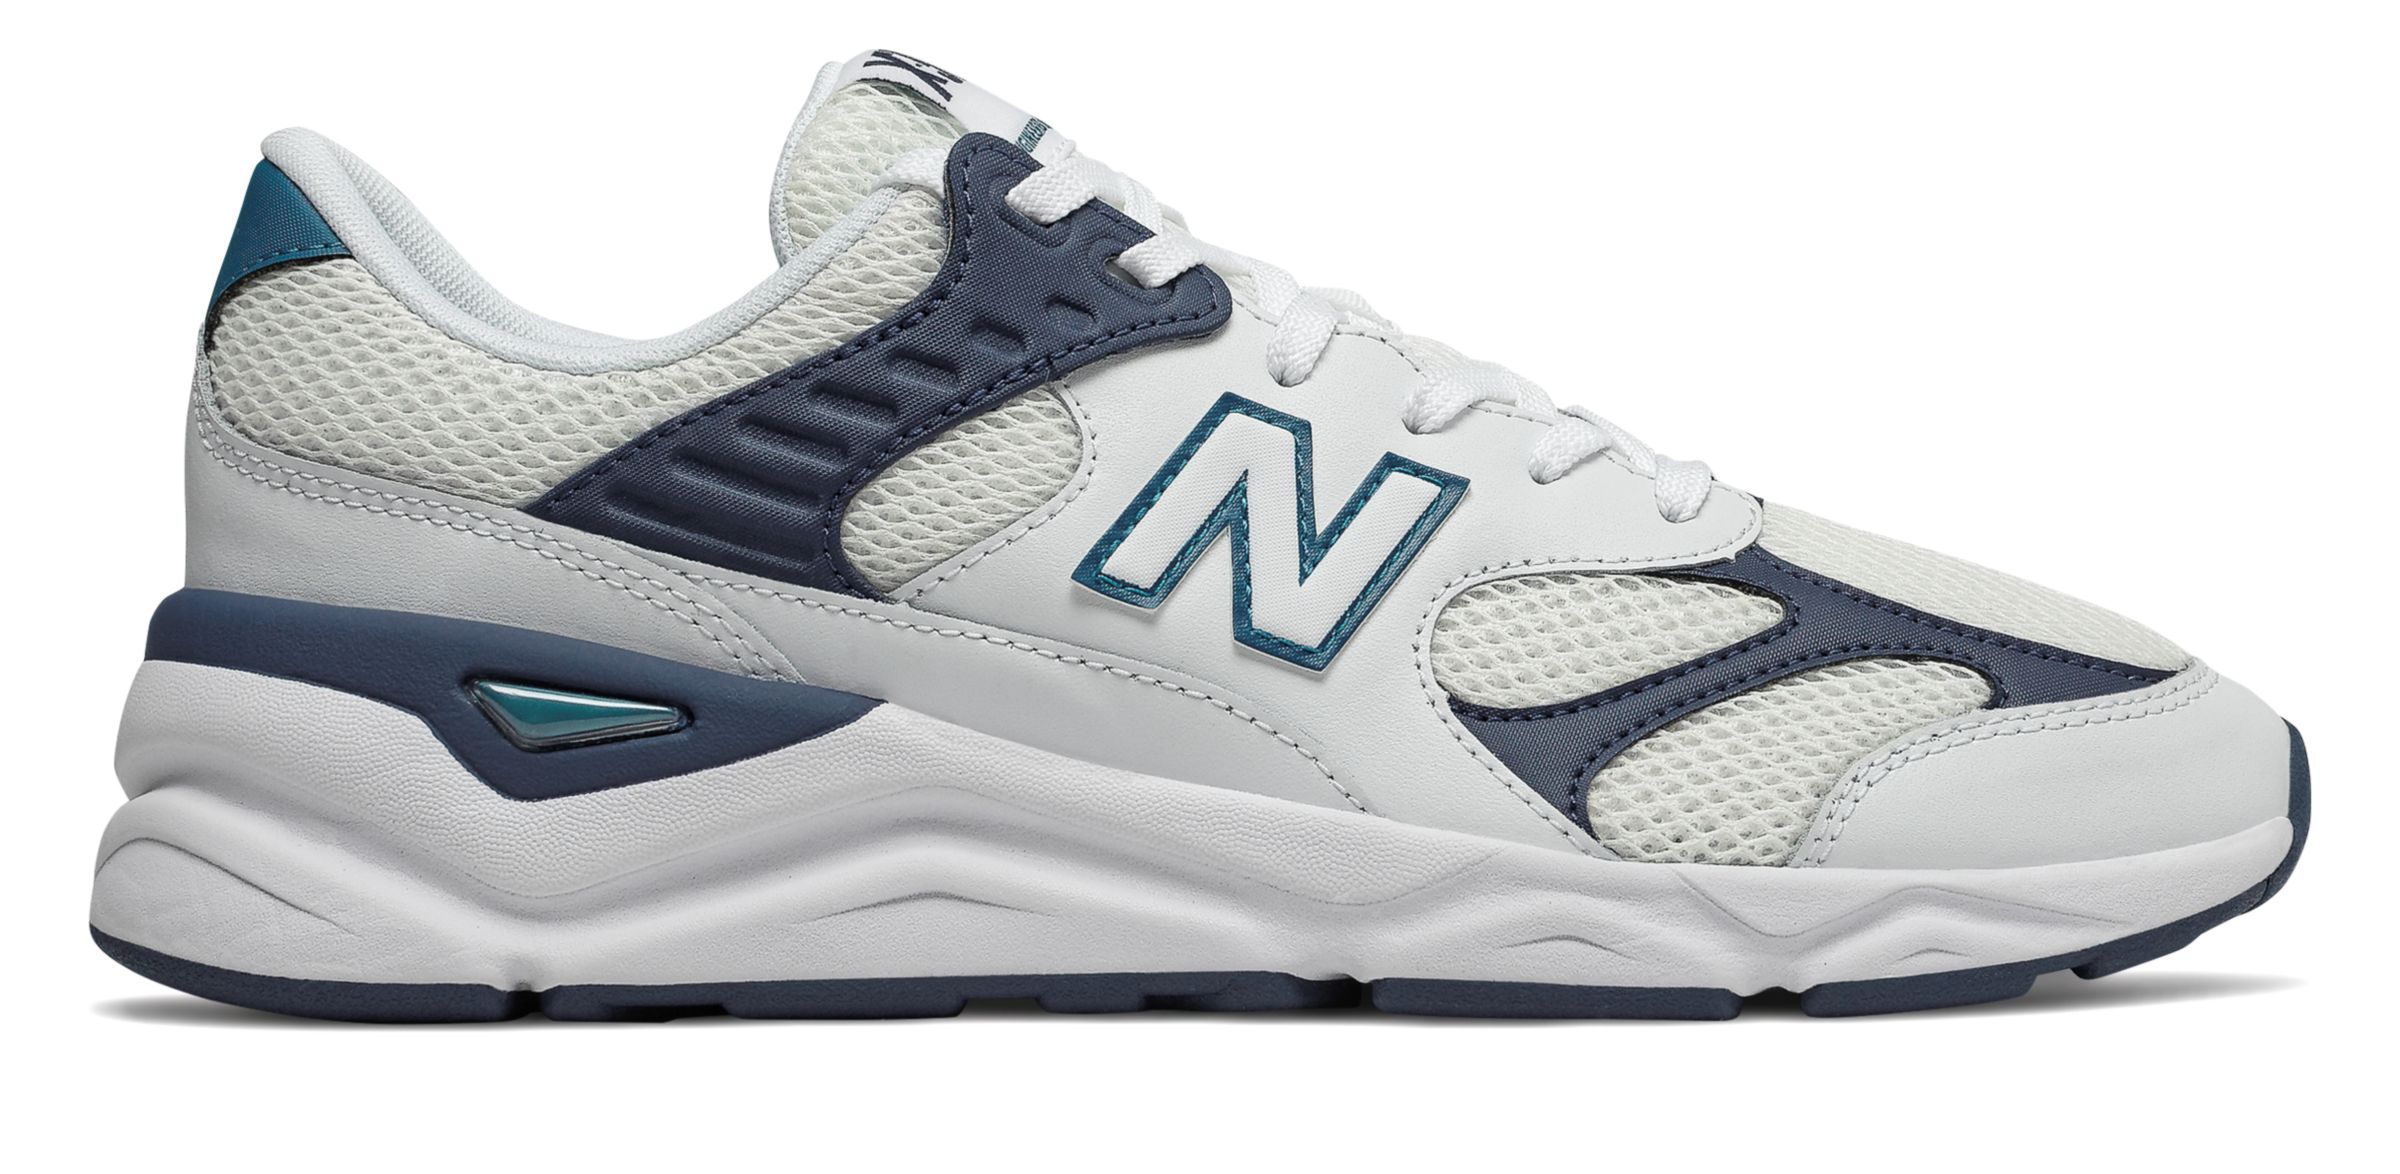 nb x90 reconstructed